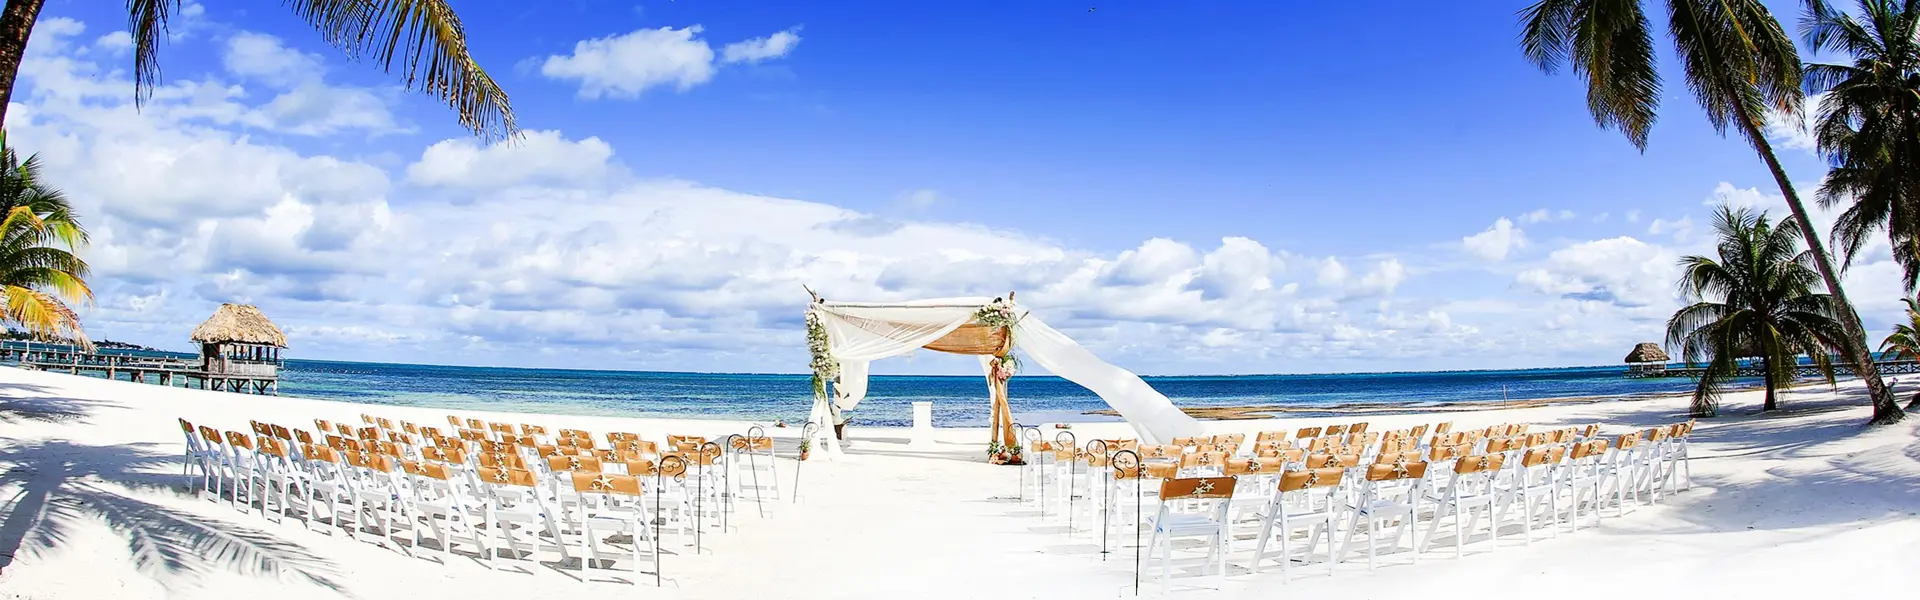 Belize wedding on the beach at Victoria House Resort and Spa